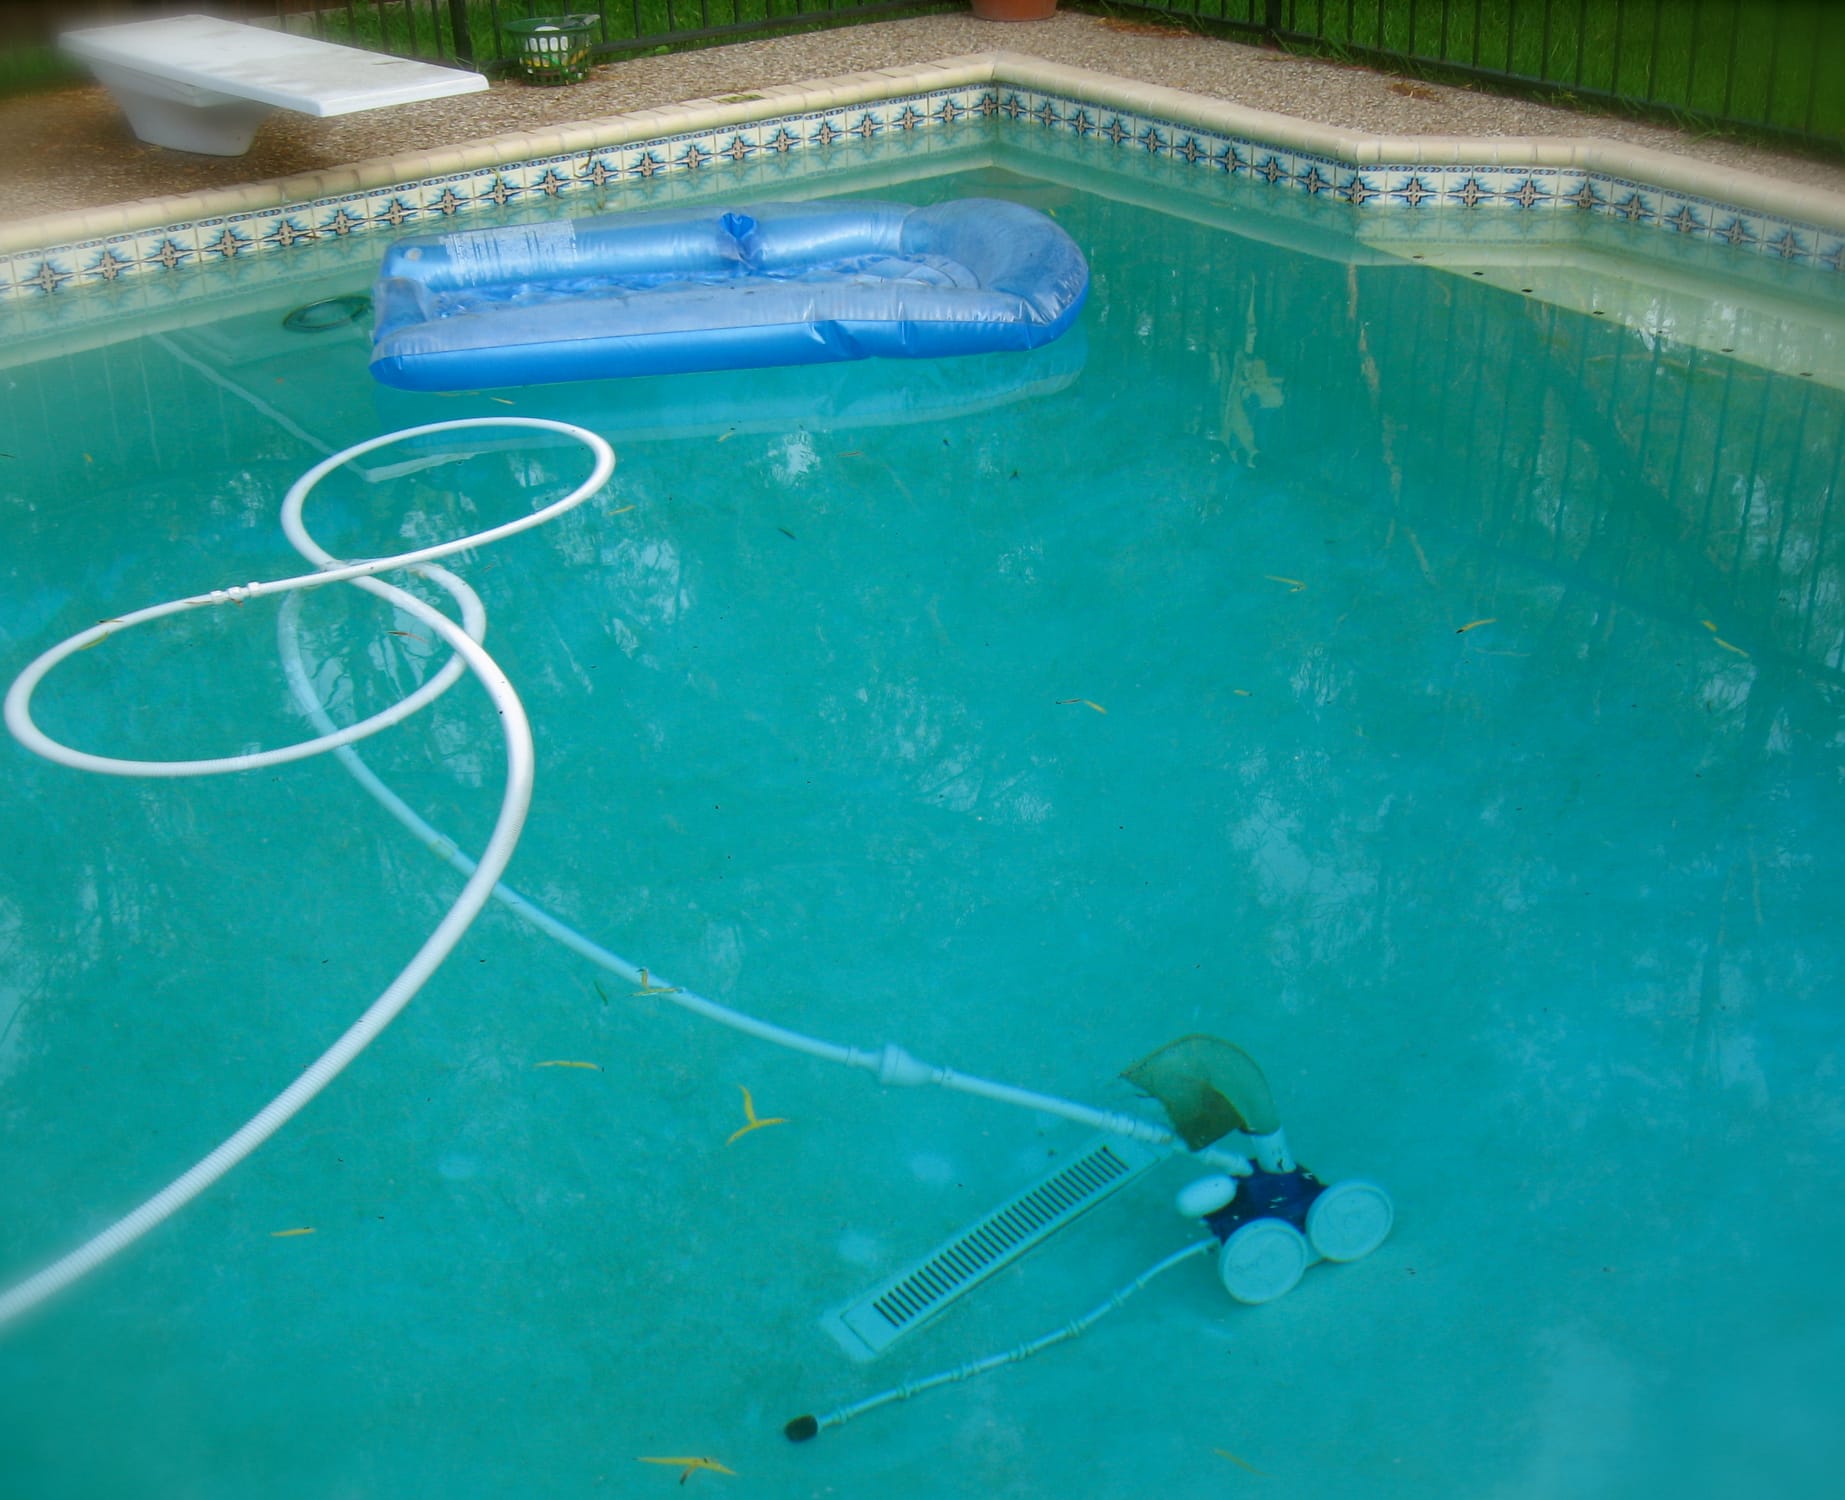 Pool Cleaner – Buying Guide